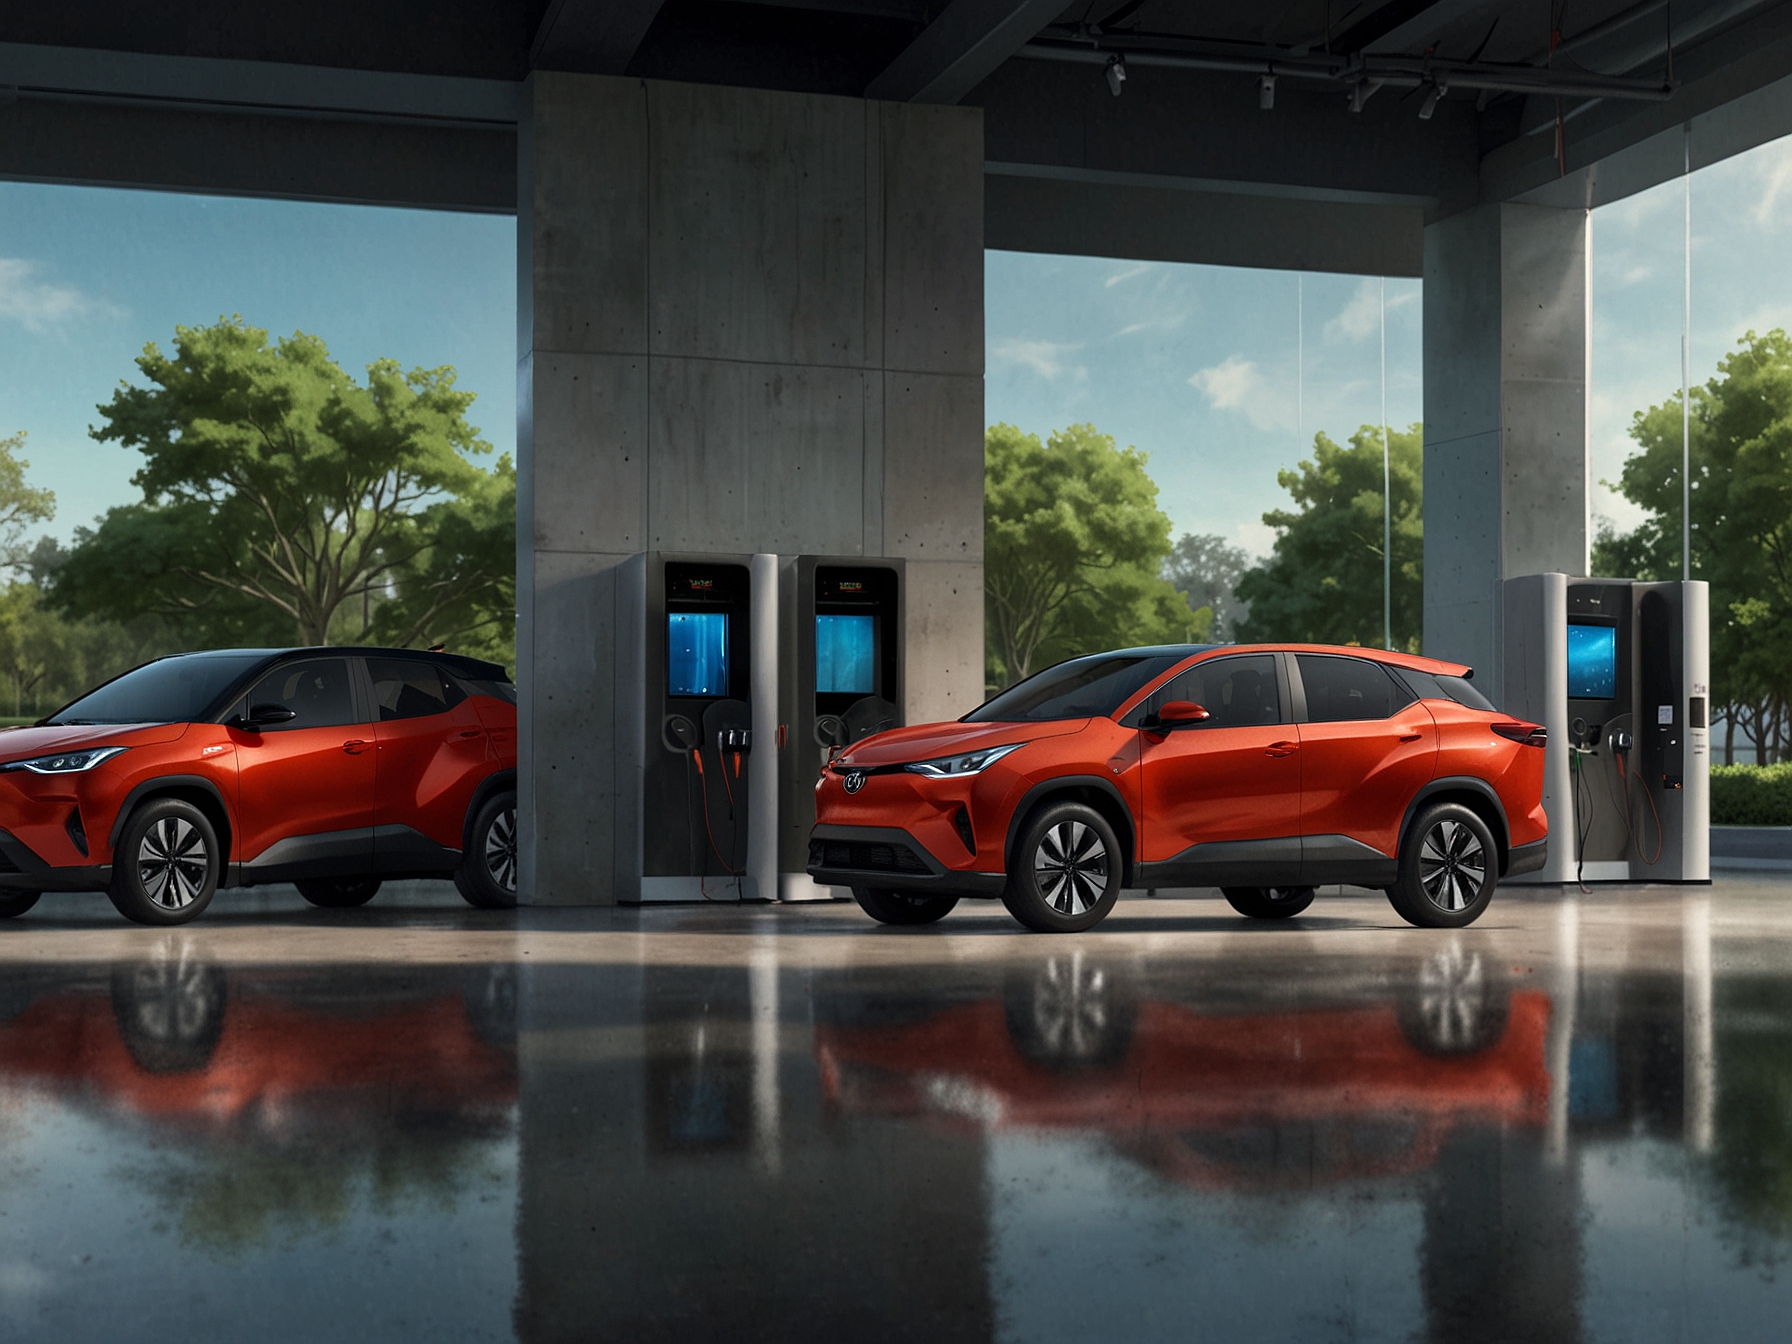 An image illustrating Toyota's ambition in the electric vehicle market with a lineup of new battery electric models, emphasizing its commitment to sustainable transportation.